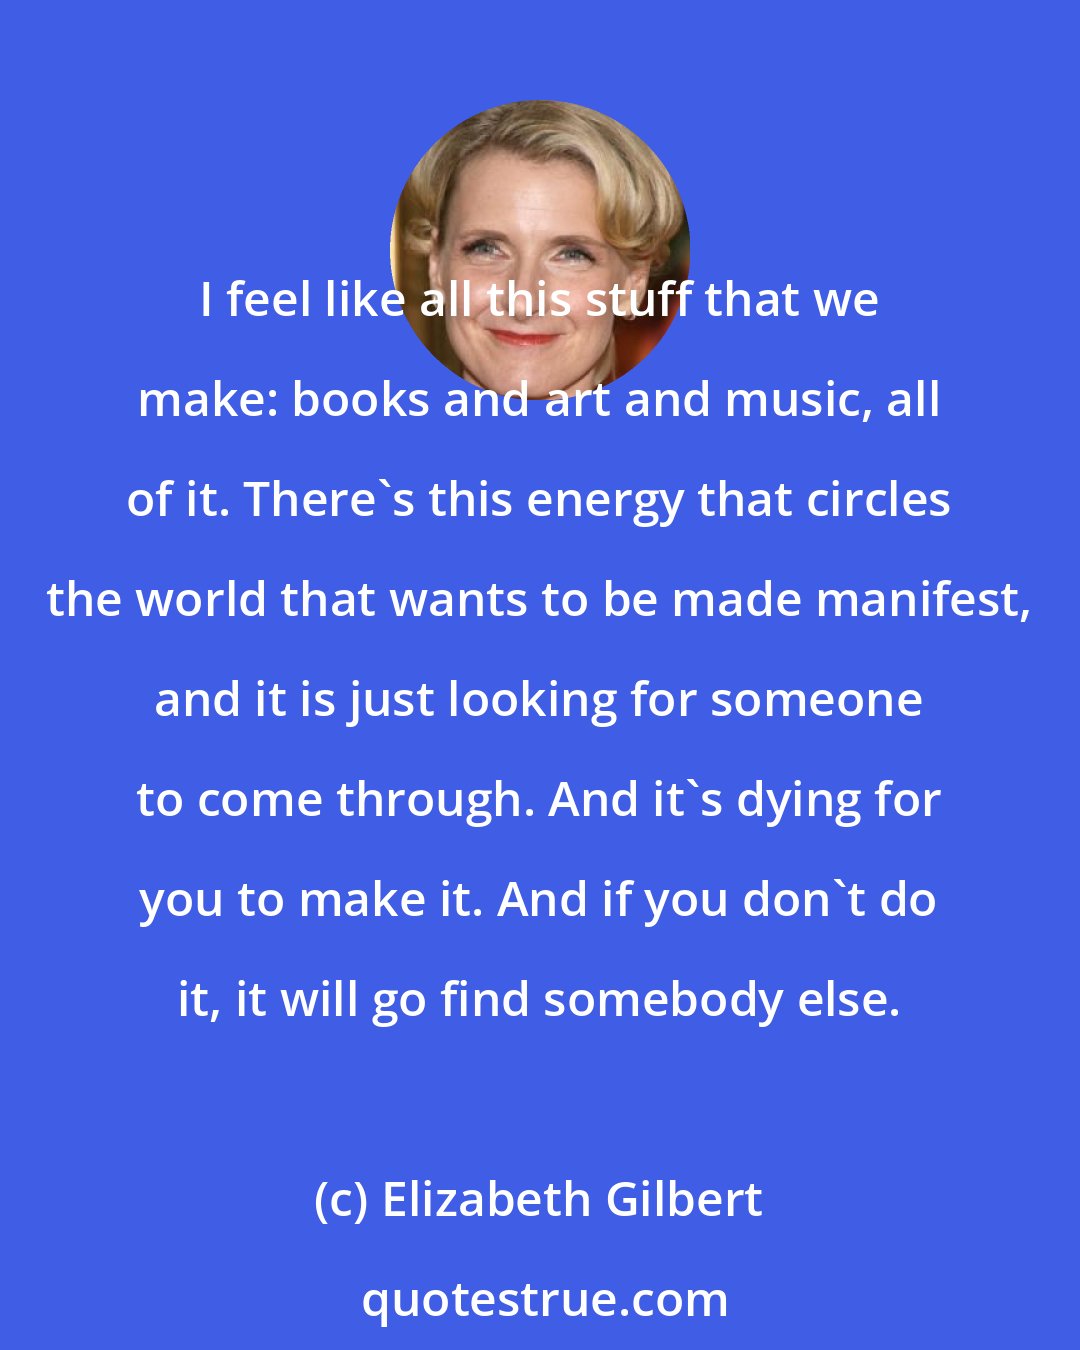 Elizabeth Gilbert: I feel like all this stuff that we make: books and art and music, all of it. There's this energy that circles the world that wants to be made manifest, and it is just looking for someone to come through. And it's dying for you to make it. And if you don't do it, it will go find somebody else.